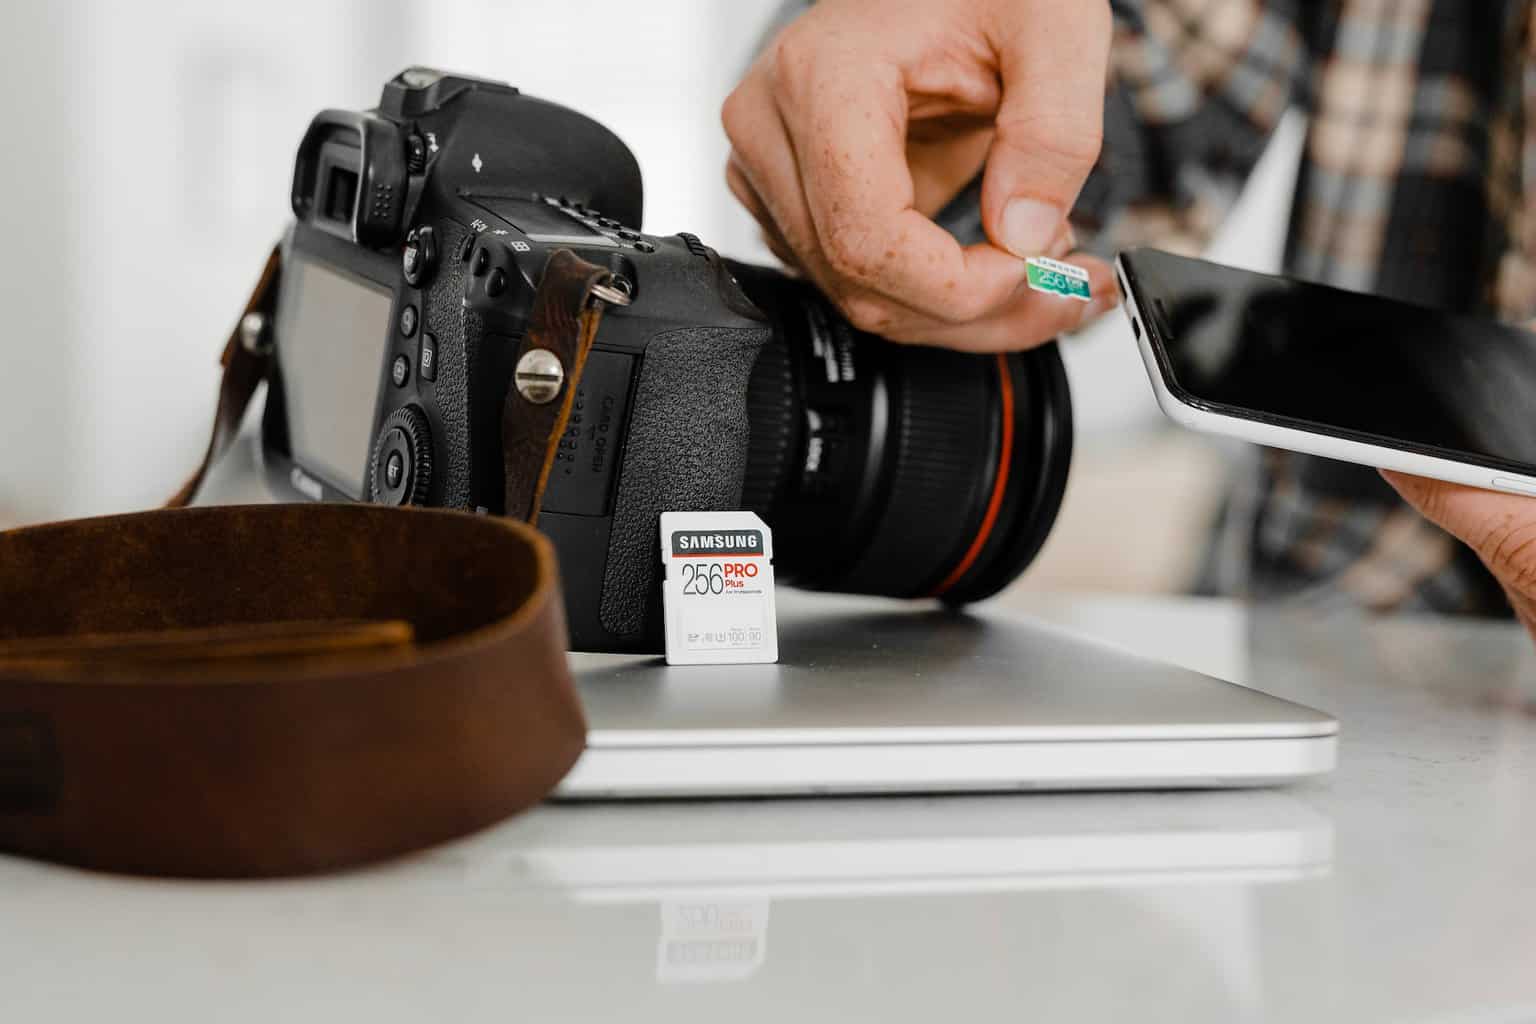 How To Reformat Memory Cards